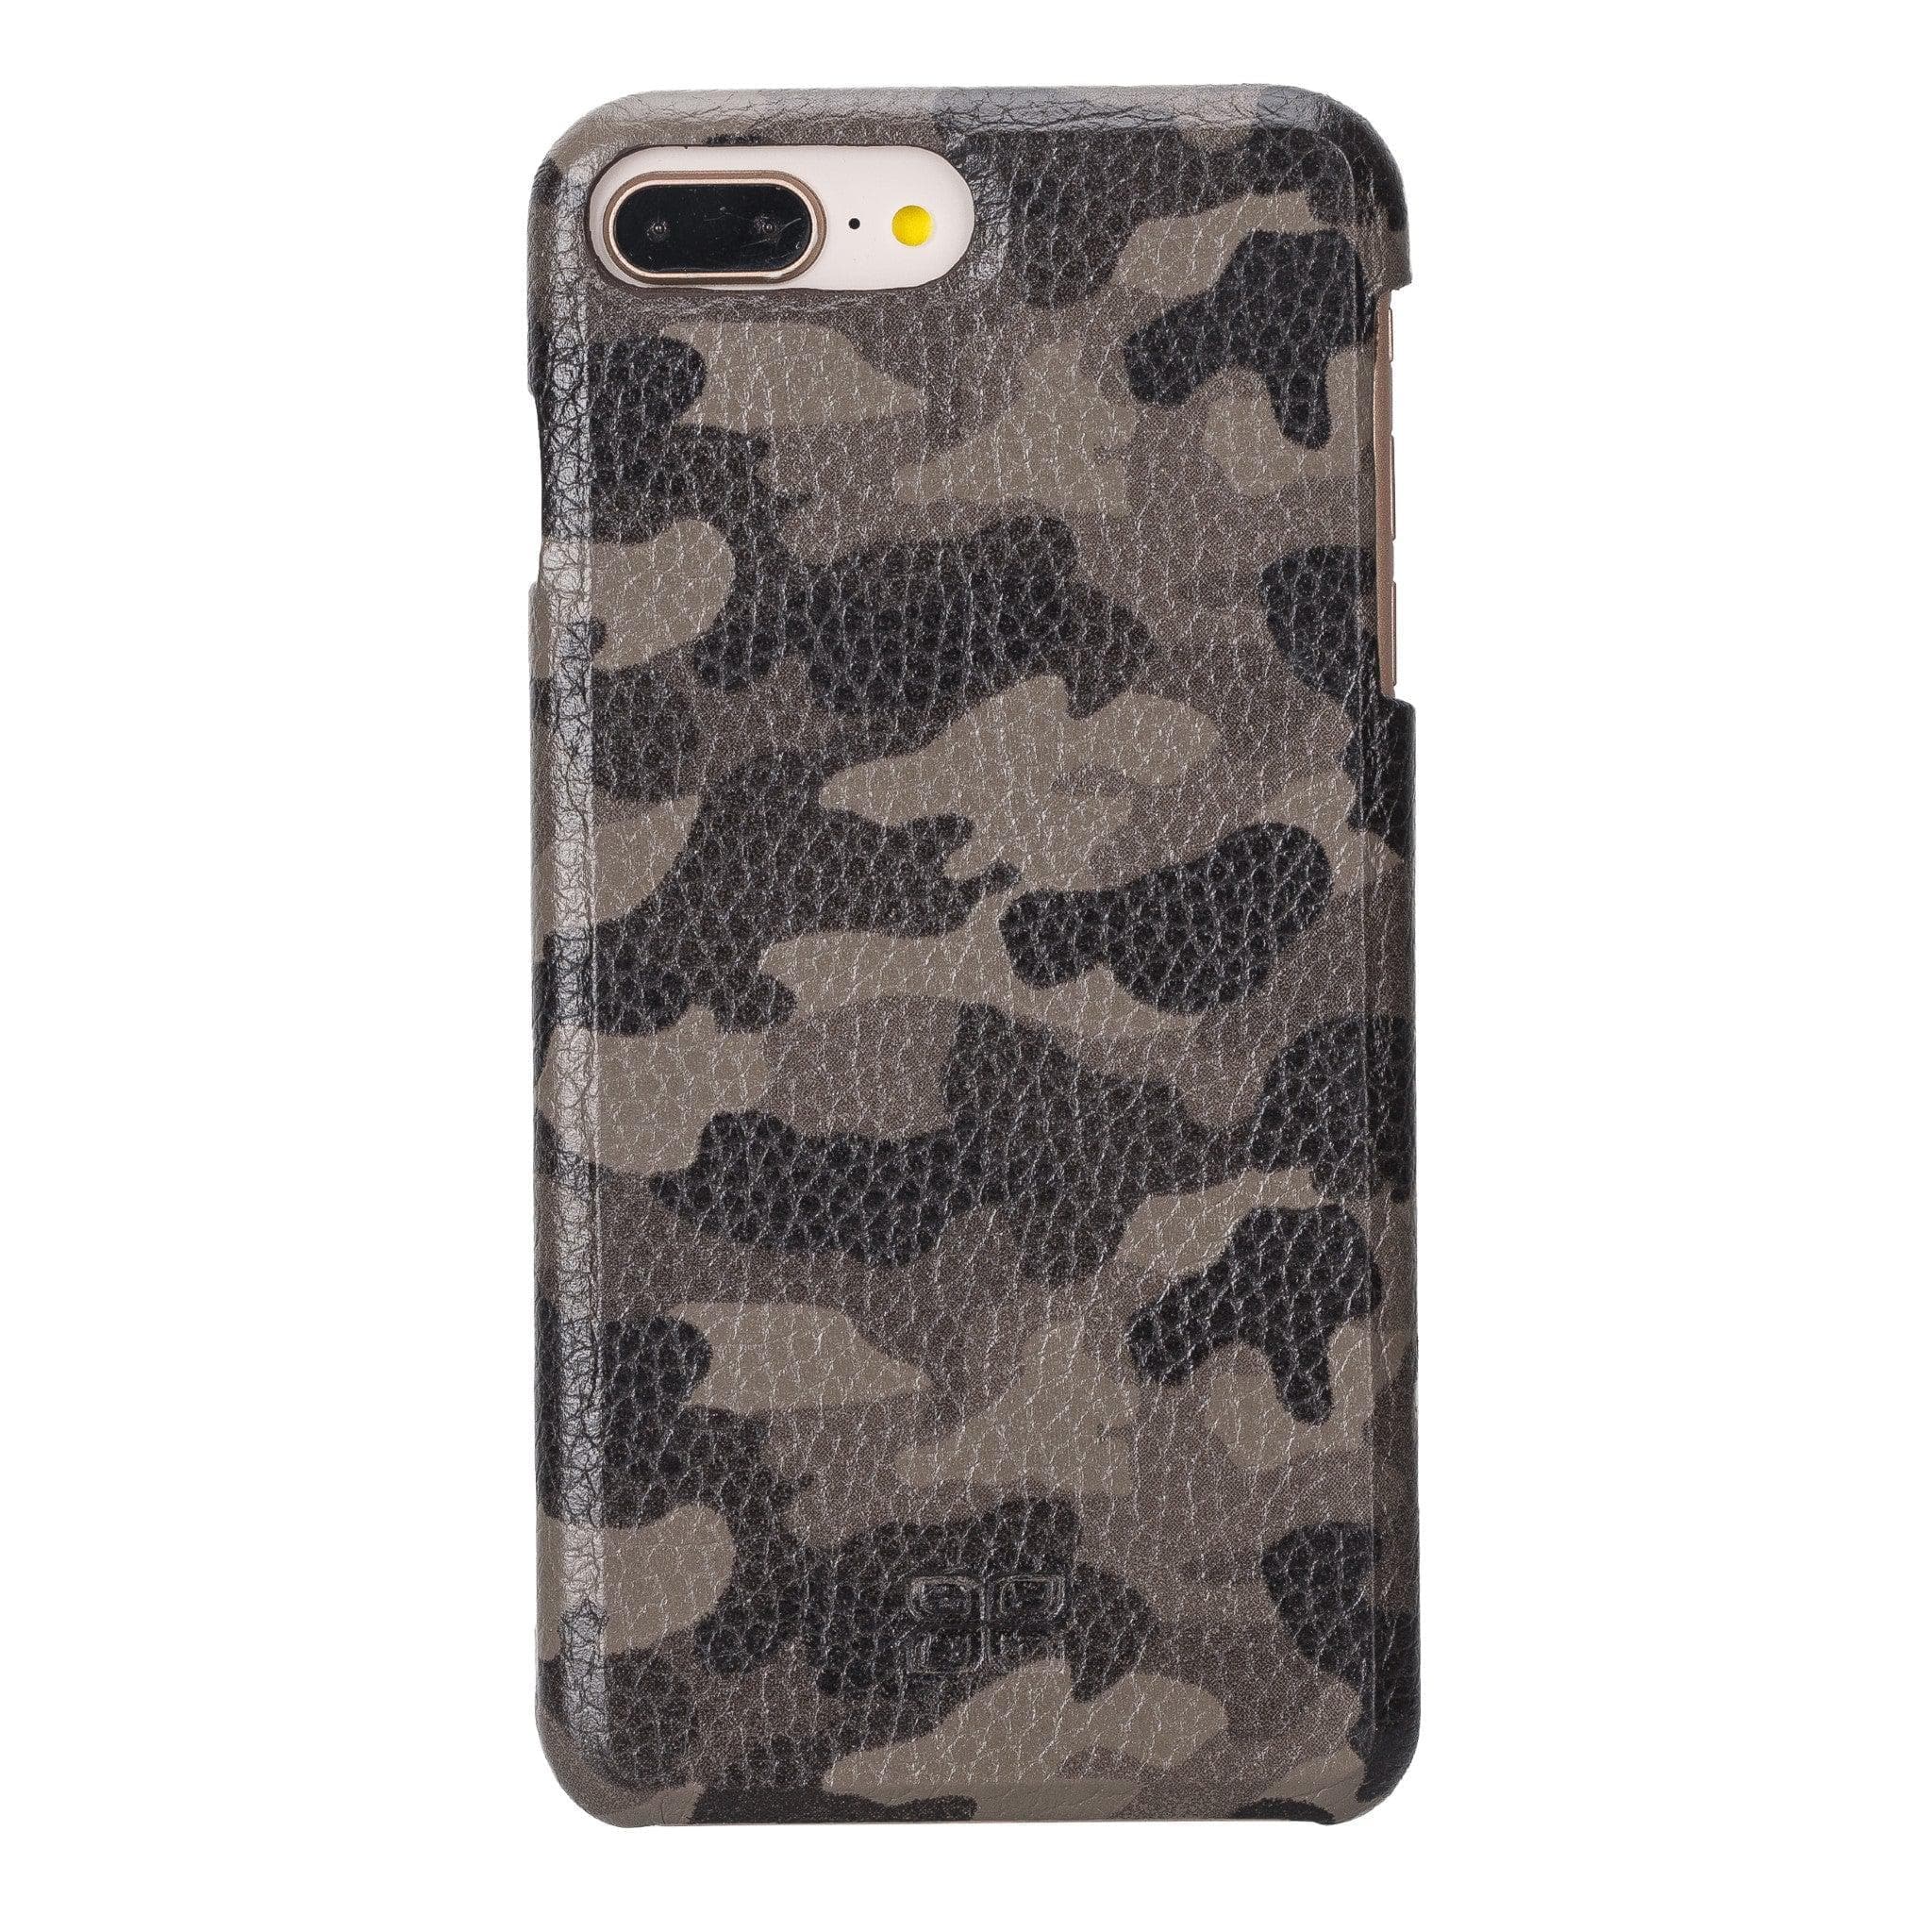 Apple iPhone 8 Series Fully Covering Leather Back Cover Case iPhone 8 / Camouflage Gray Bouletta LTD